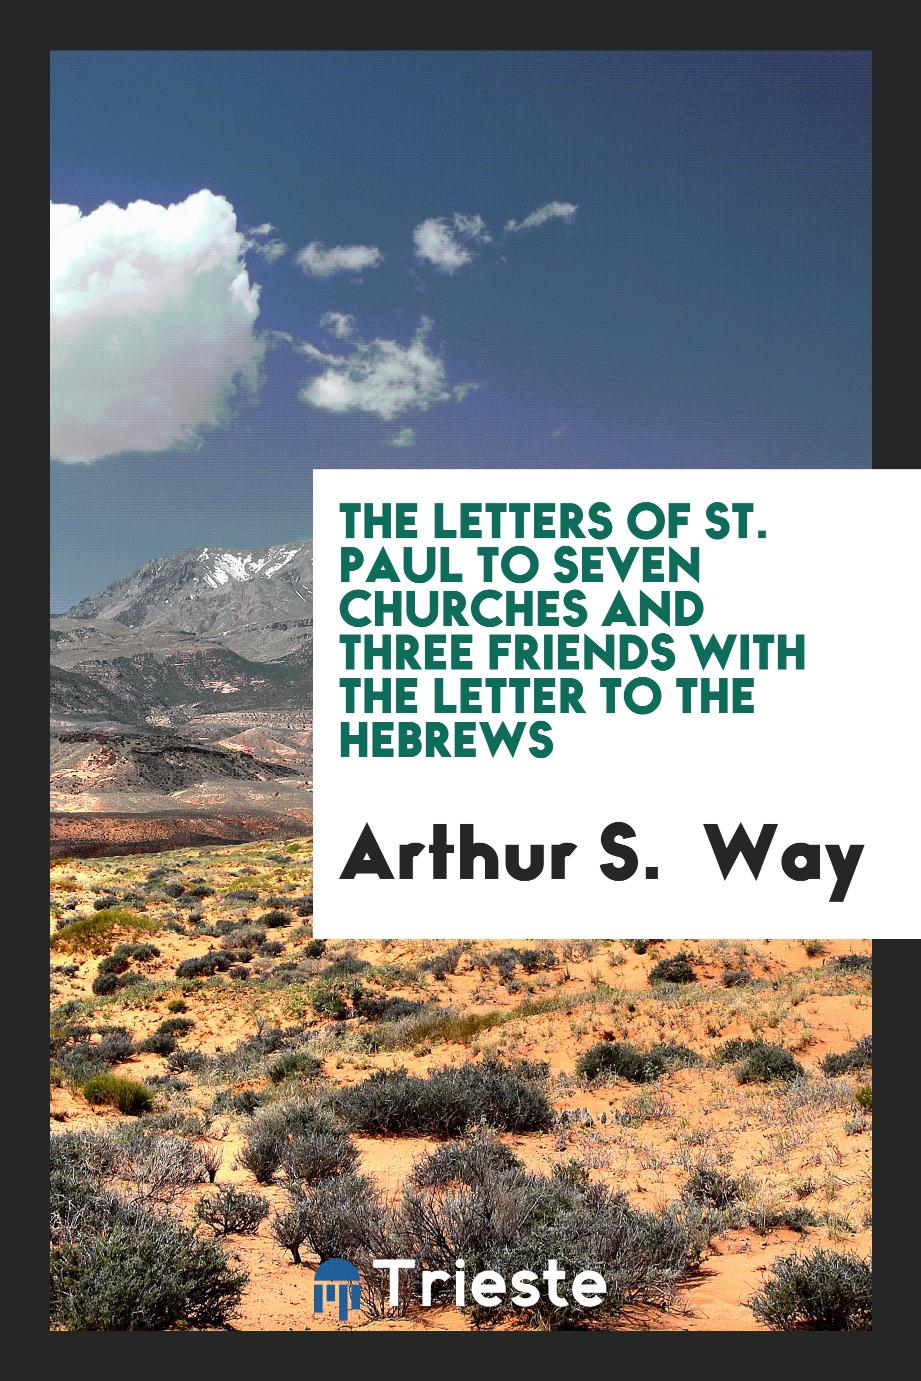 The letters of St. Paul to seven churches and three friends with the letter to the Hebrews